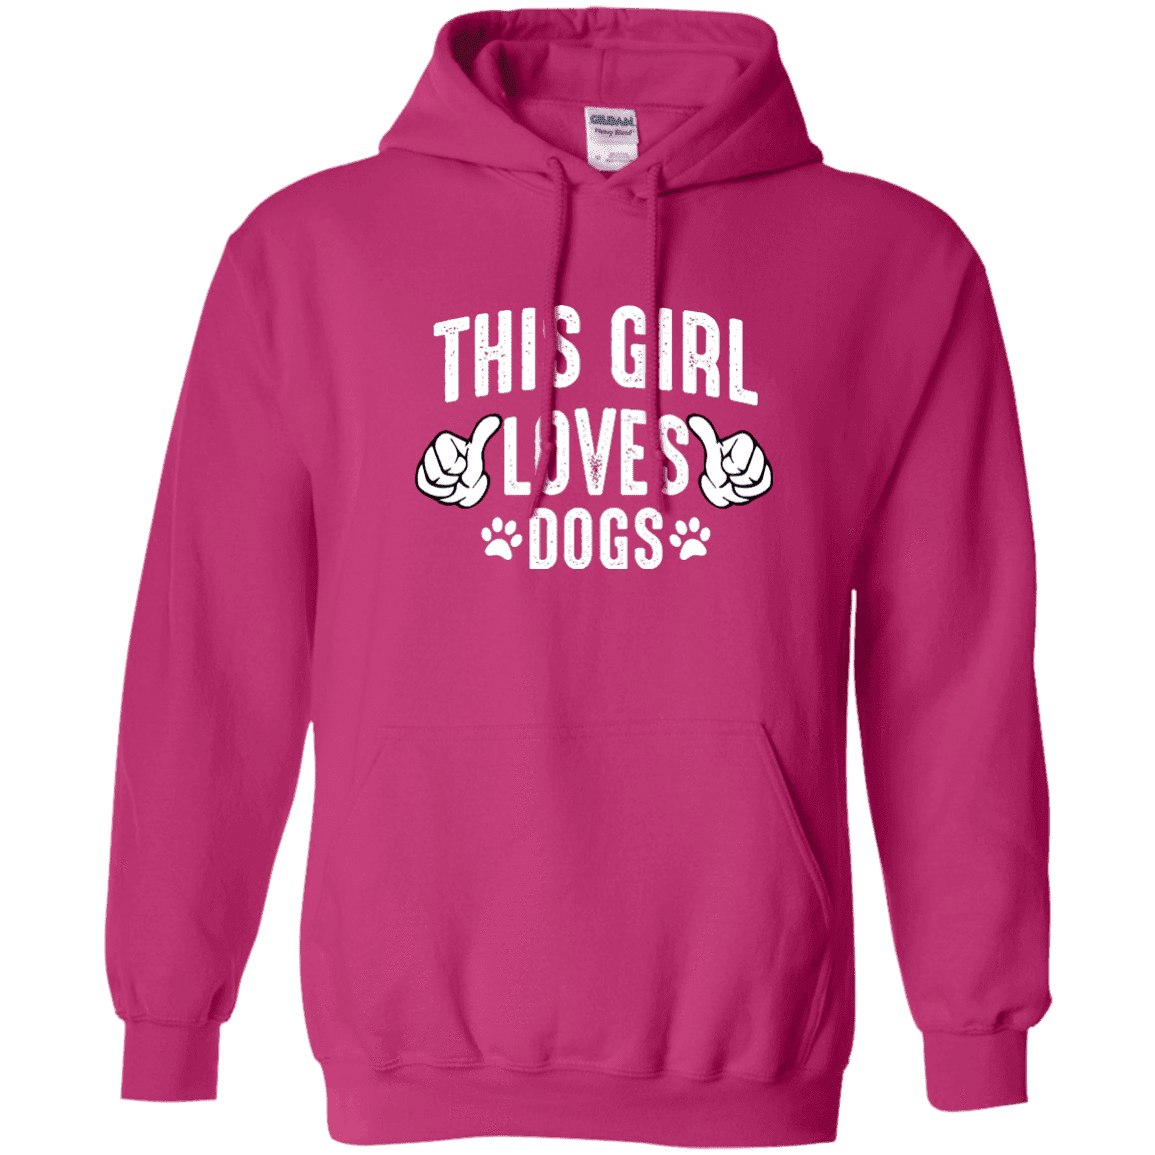 This Girl Loves Dogs - Hoodie – Rescuers Club